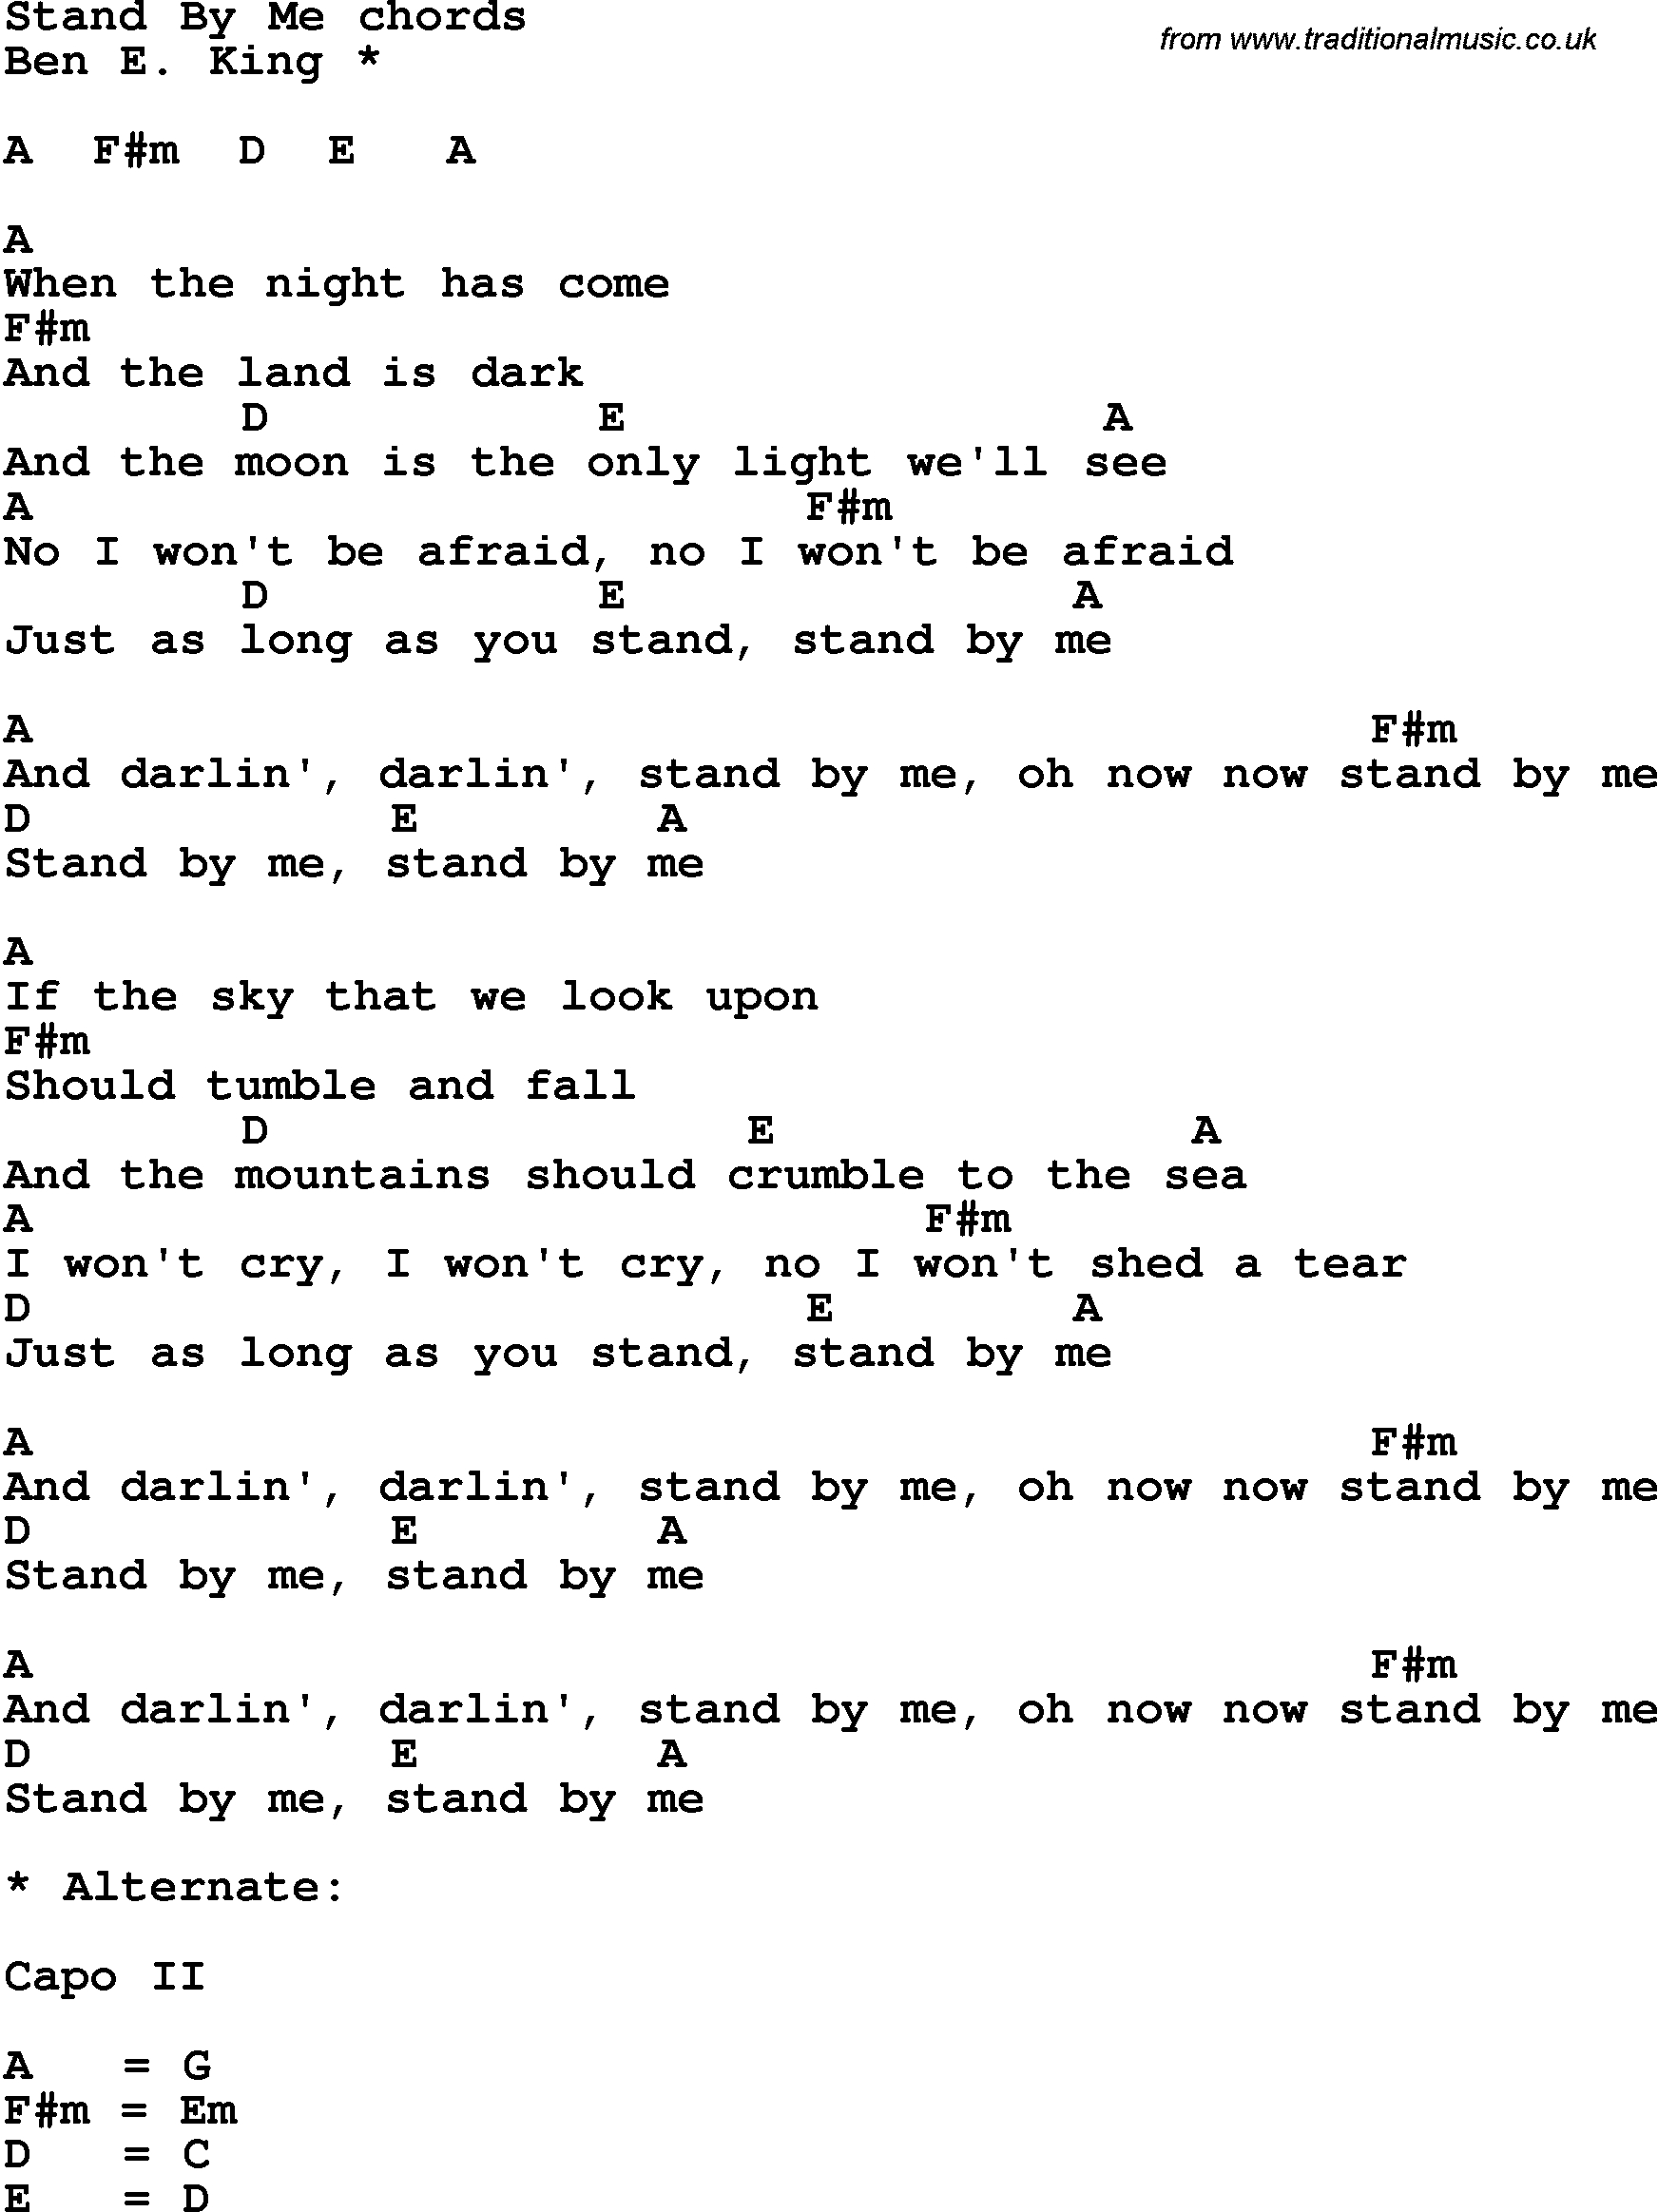 Stand By Me Chords Song Lyrics With Guitar Chords For Stand Me